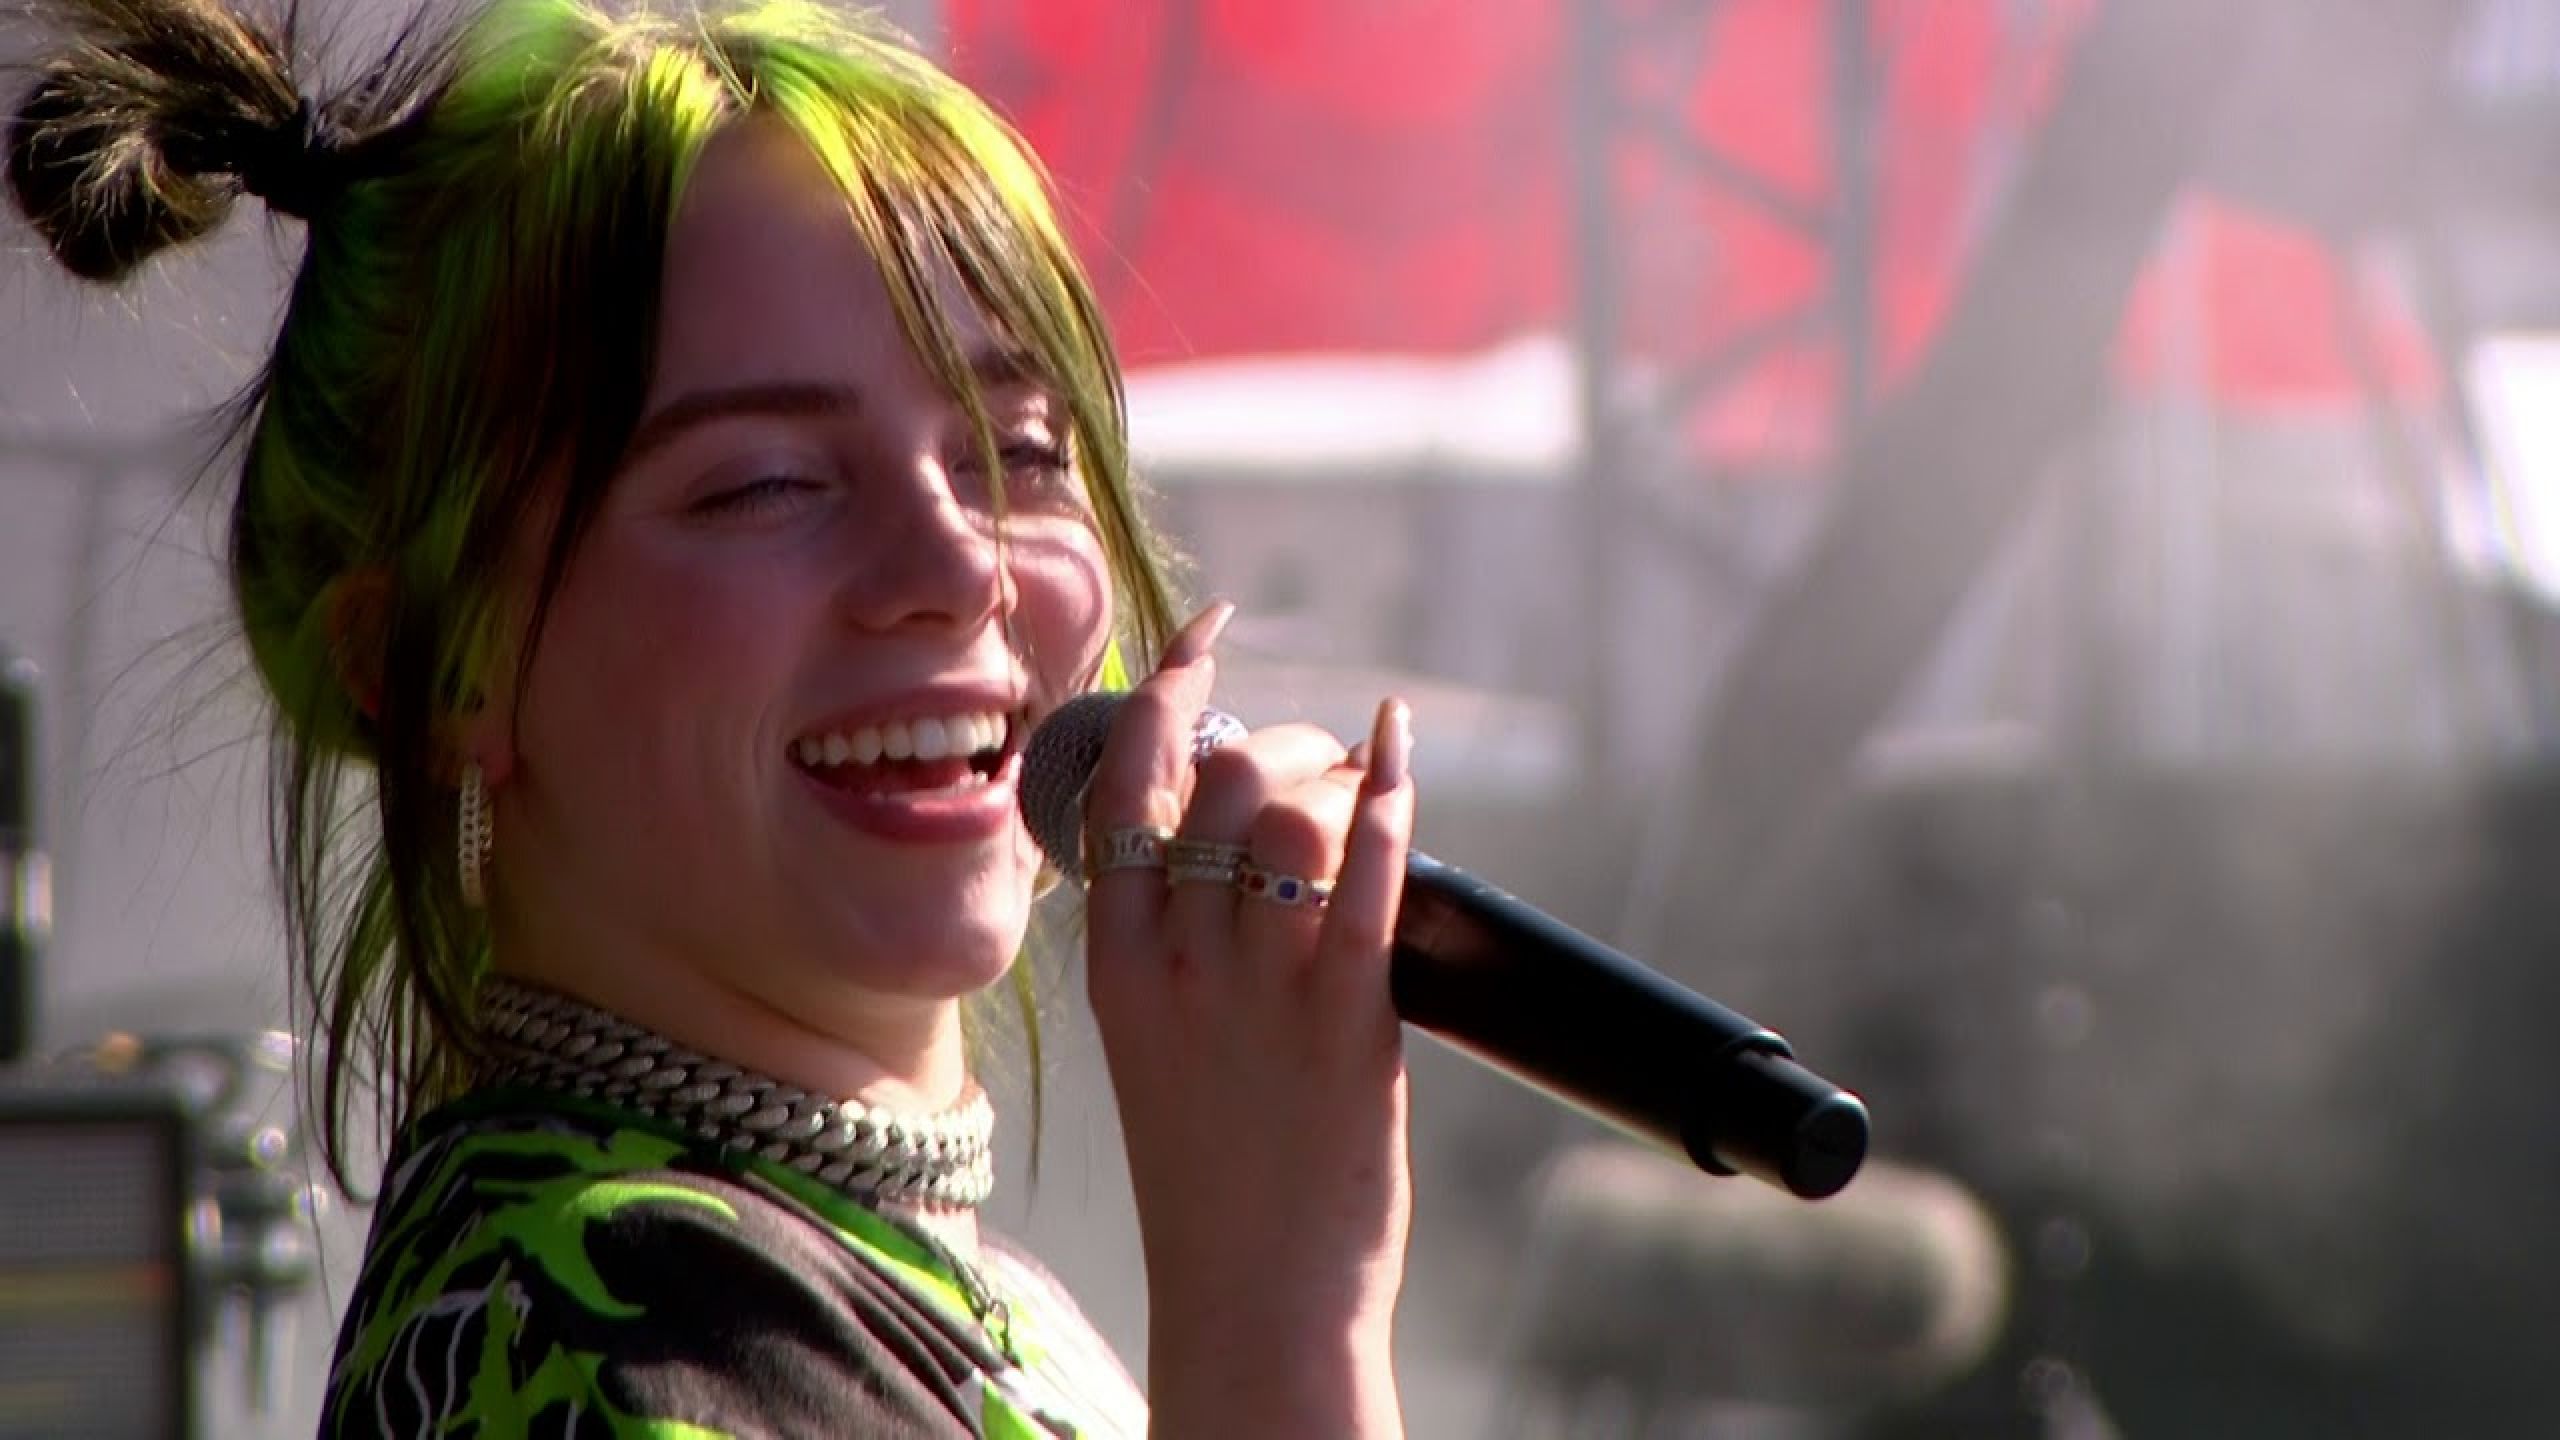 Billie Eilish's blue hair and outfit at the 2019 Reading and Leeds Festival - wide 7